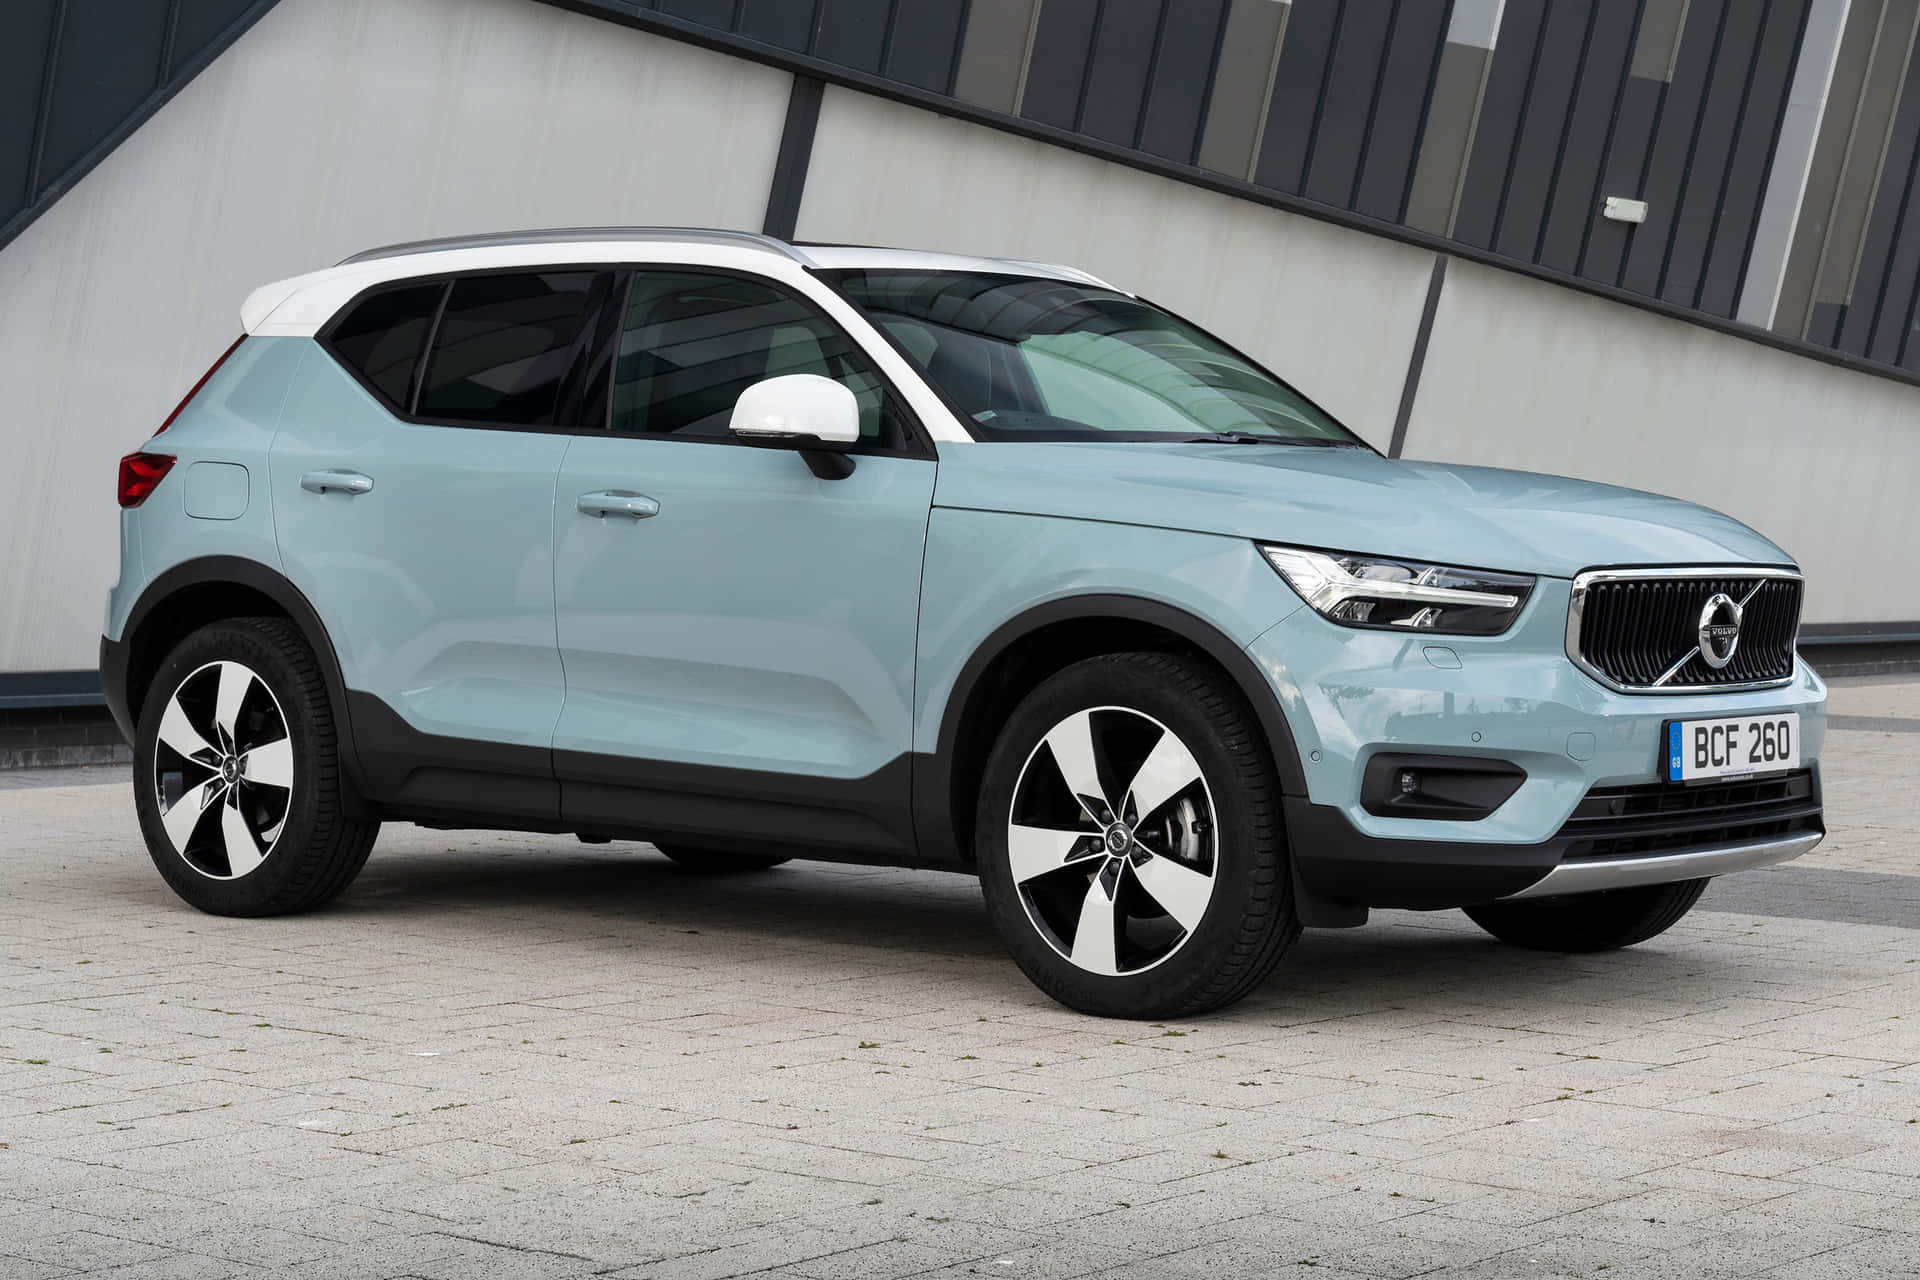 Dynamic Volvo Xc40 Luxury Compact Suv In Motion Wallpaper